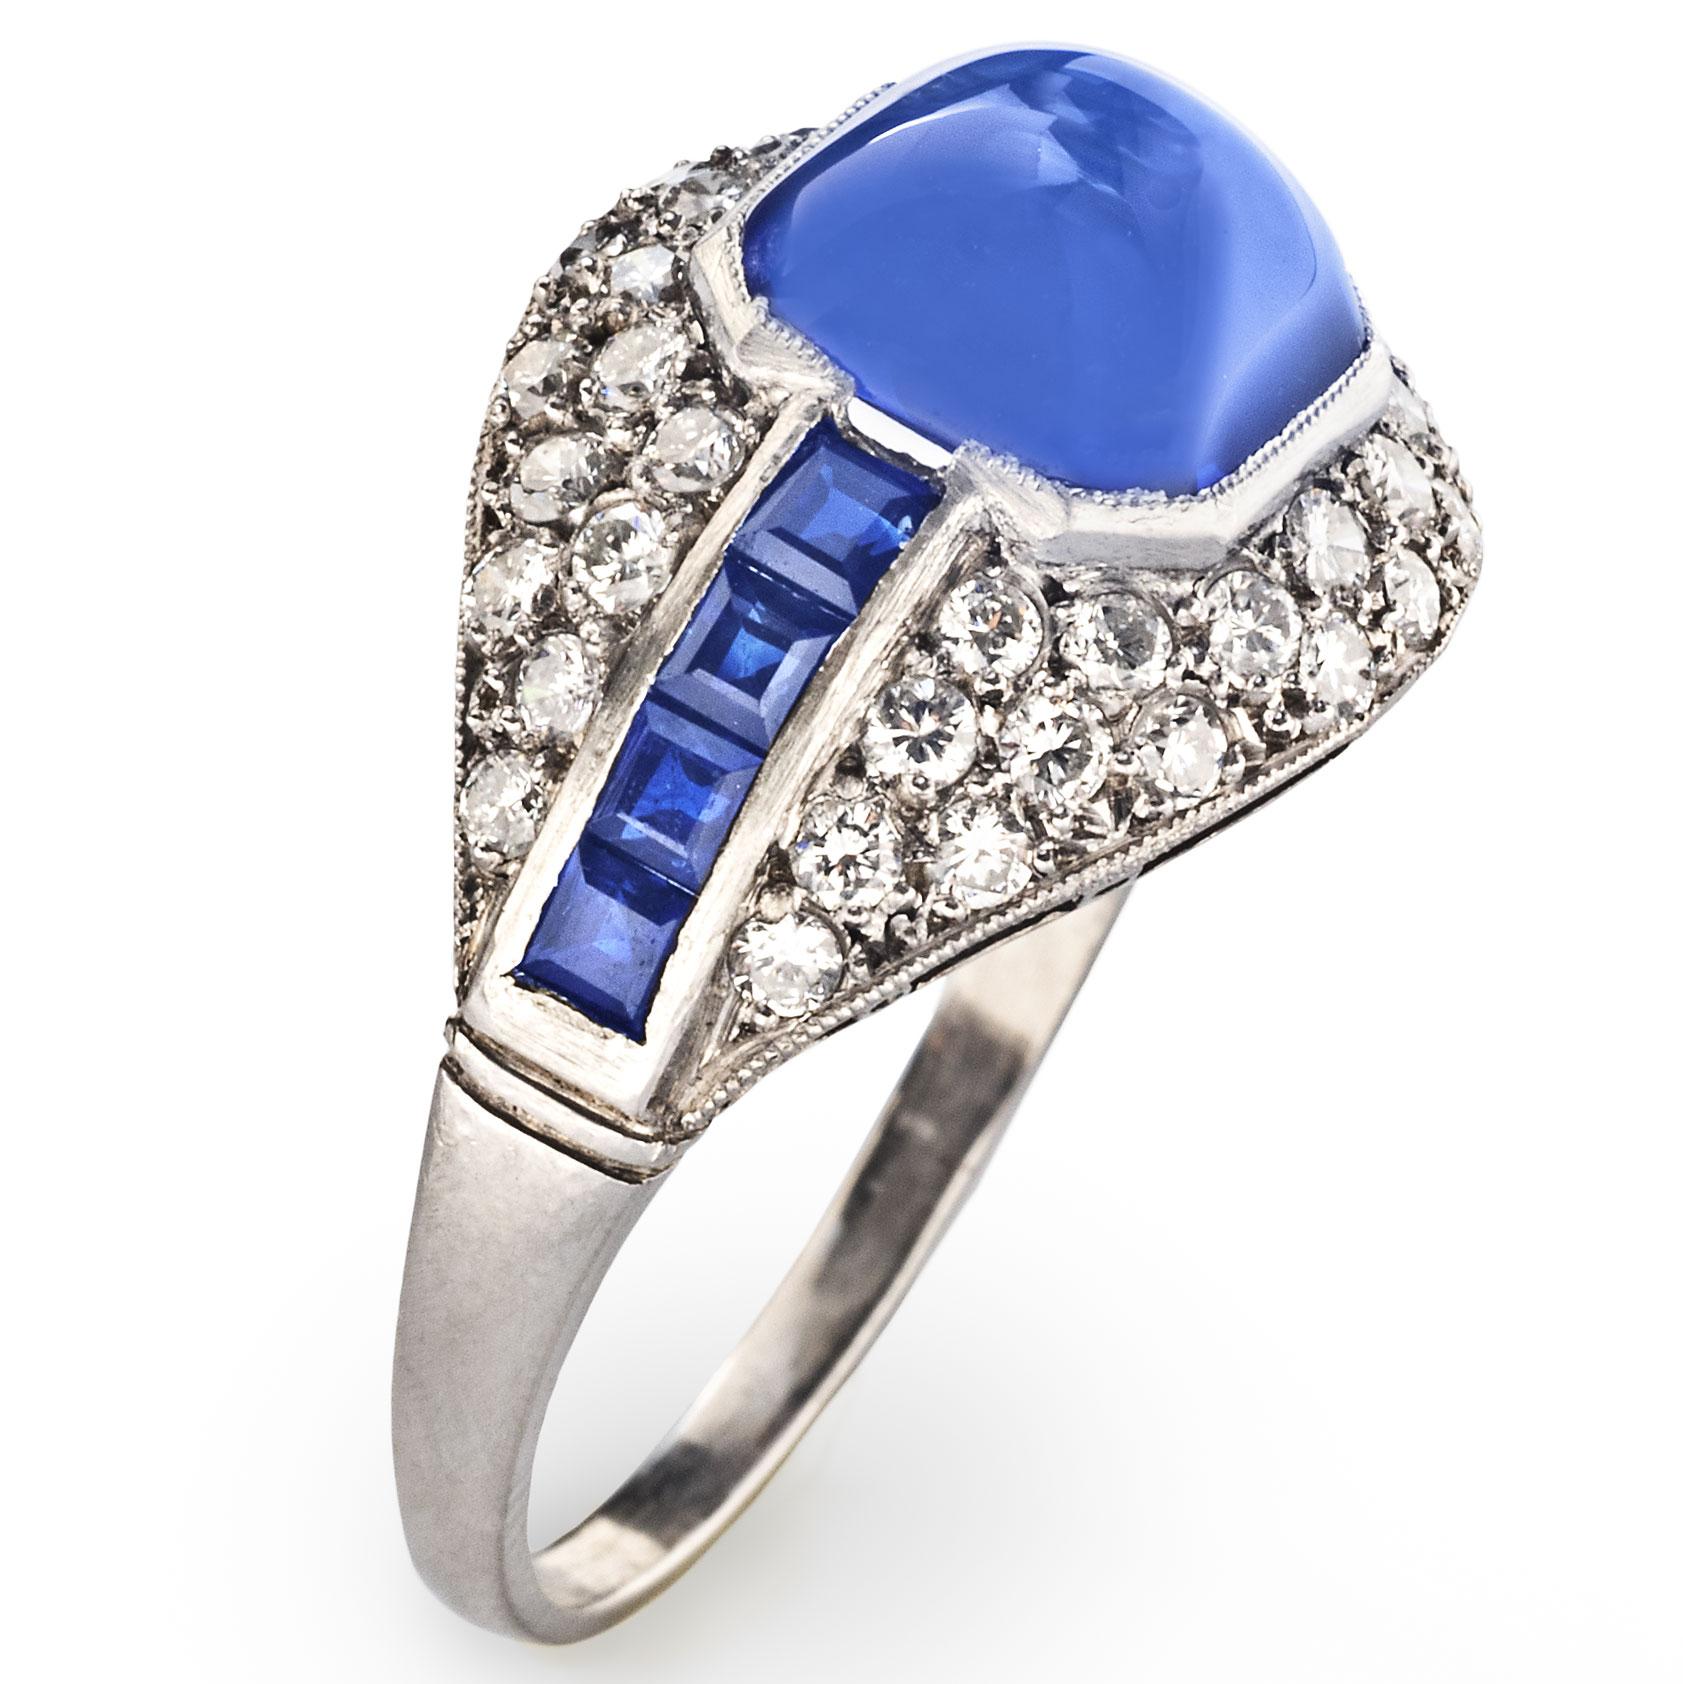 An elegant ring for everyday wear, this vintage Art Deco piece centers on a cabochon sapphire flanked by square cut sapphires in a diamond pavé setting.

Size 8
One cabochon sapphire weighing approximately 3.49 carats
Eight square cut sapphires